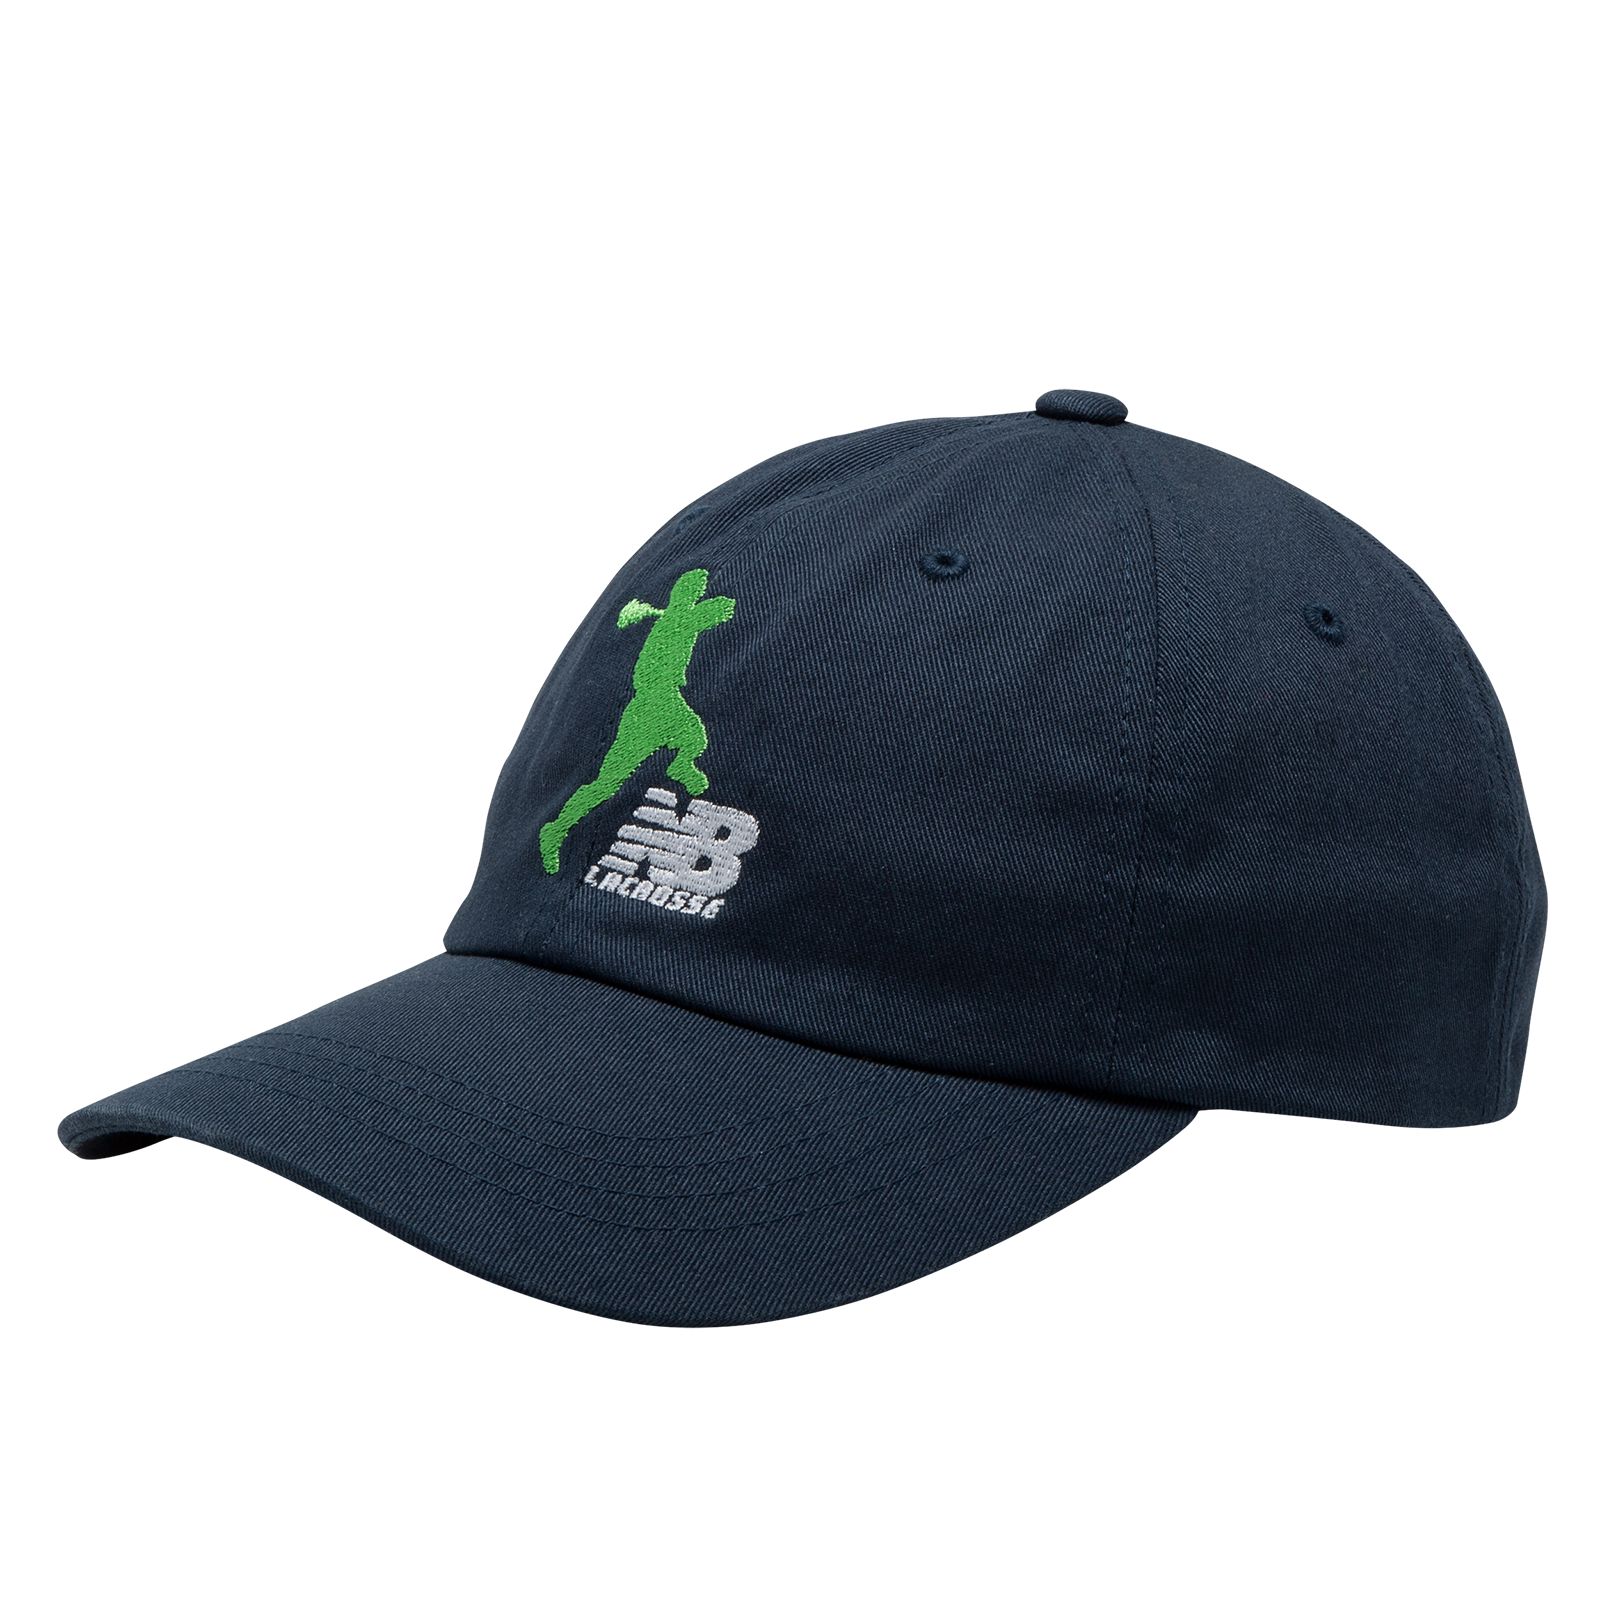 NB LAX Snap Back, Navy with Green image number 0